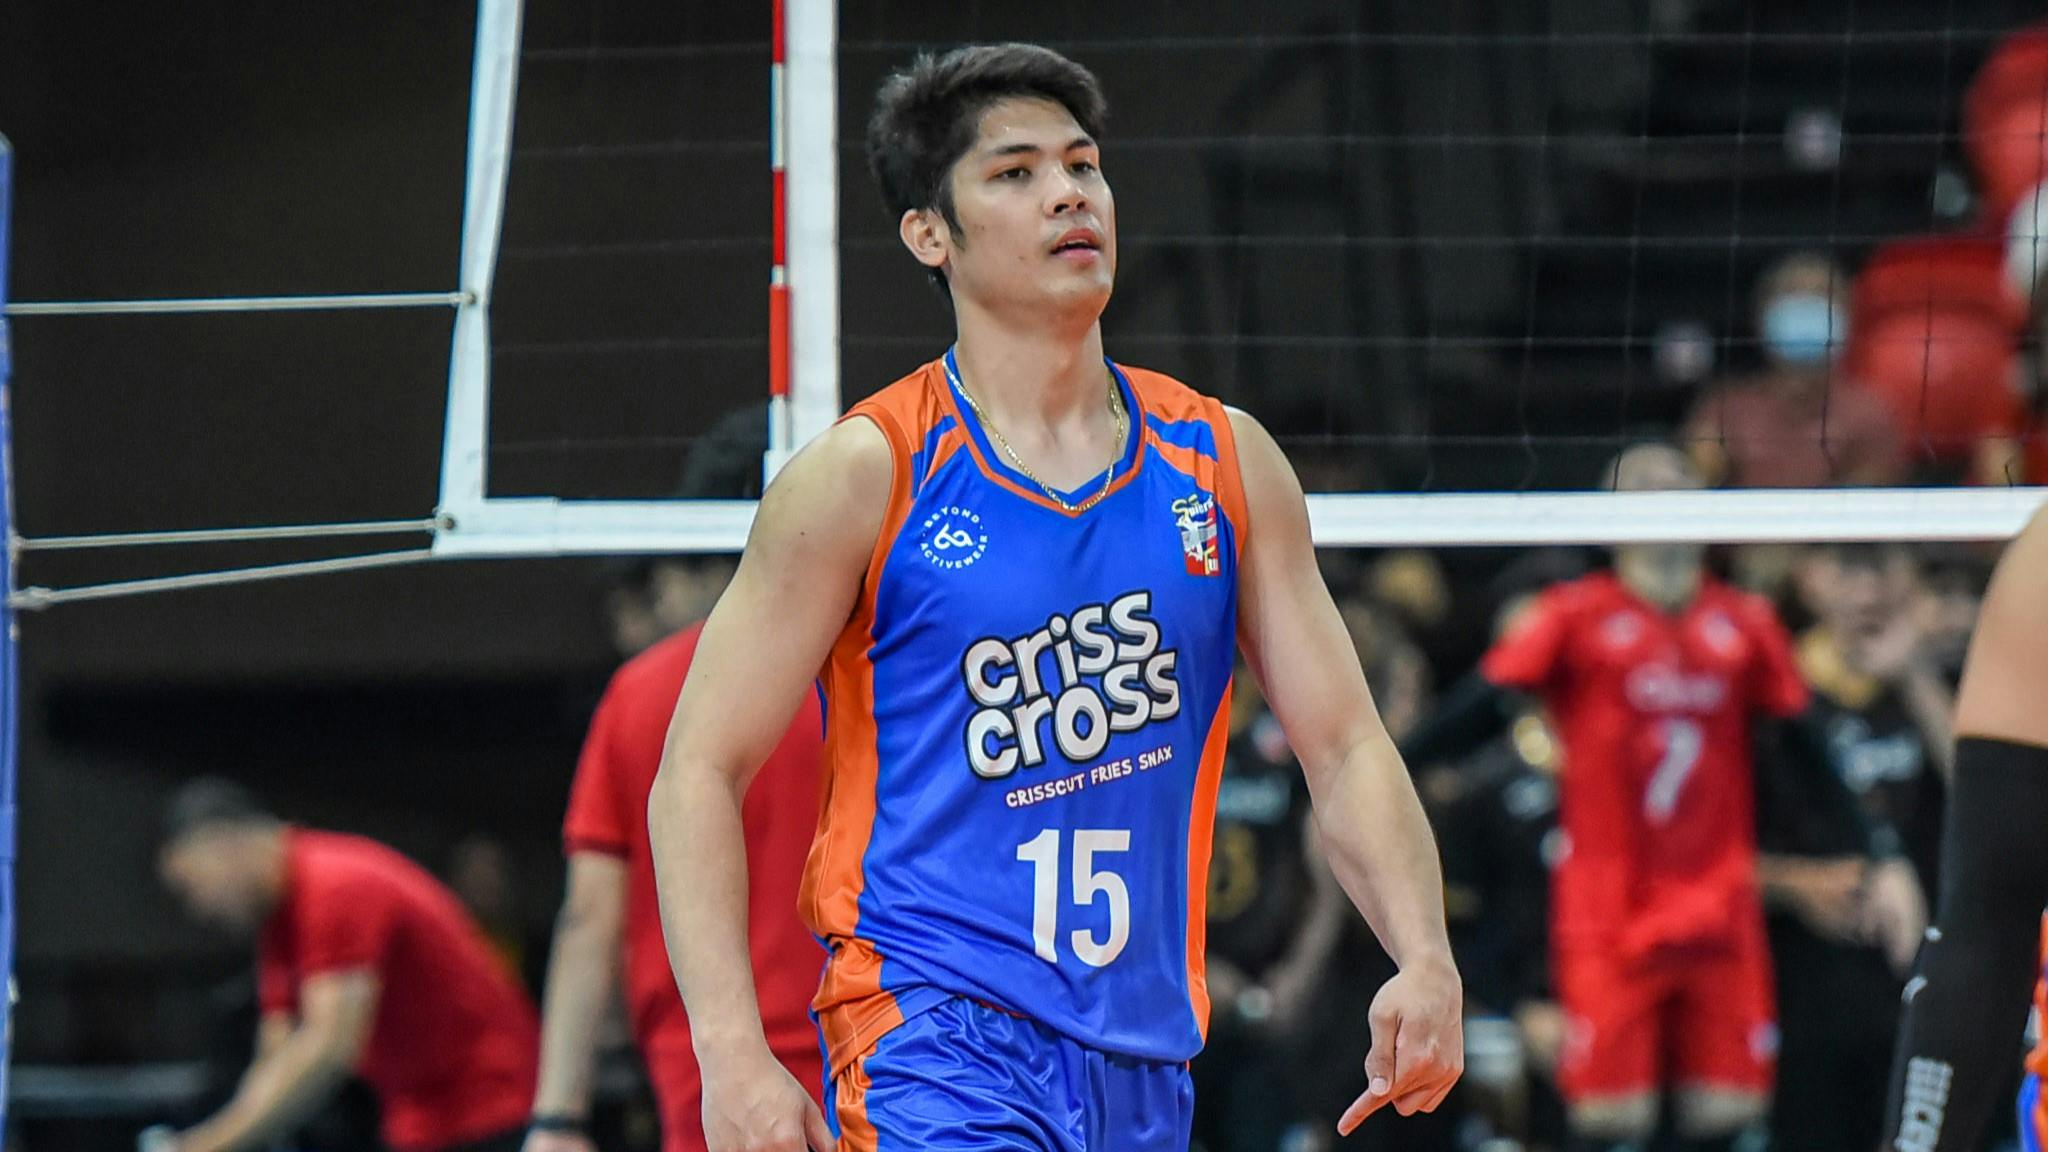 Spikers’ Turf: Marck Espejo thrilled to be back in the Philippines with new team Criss Cross